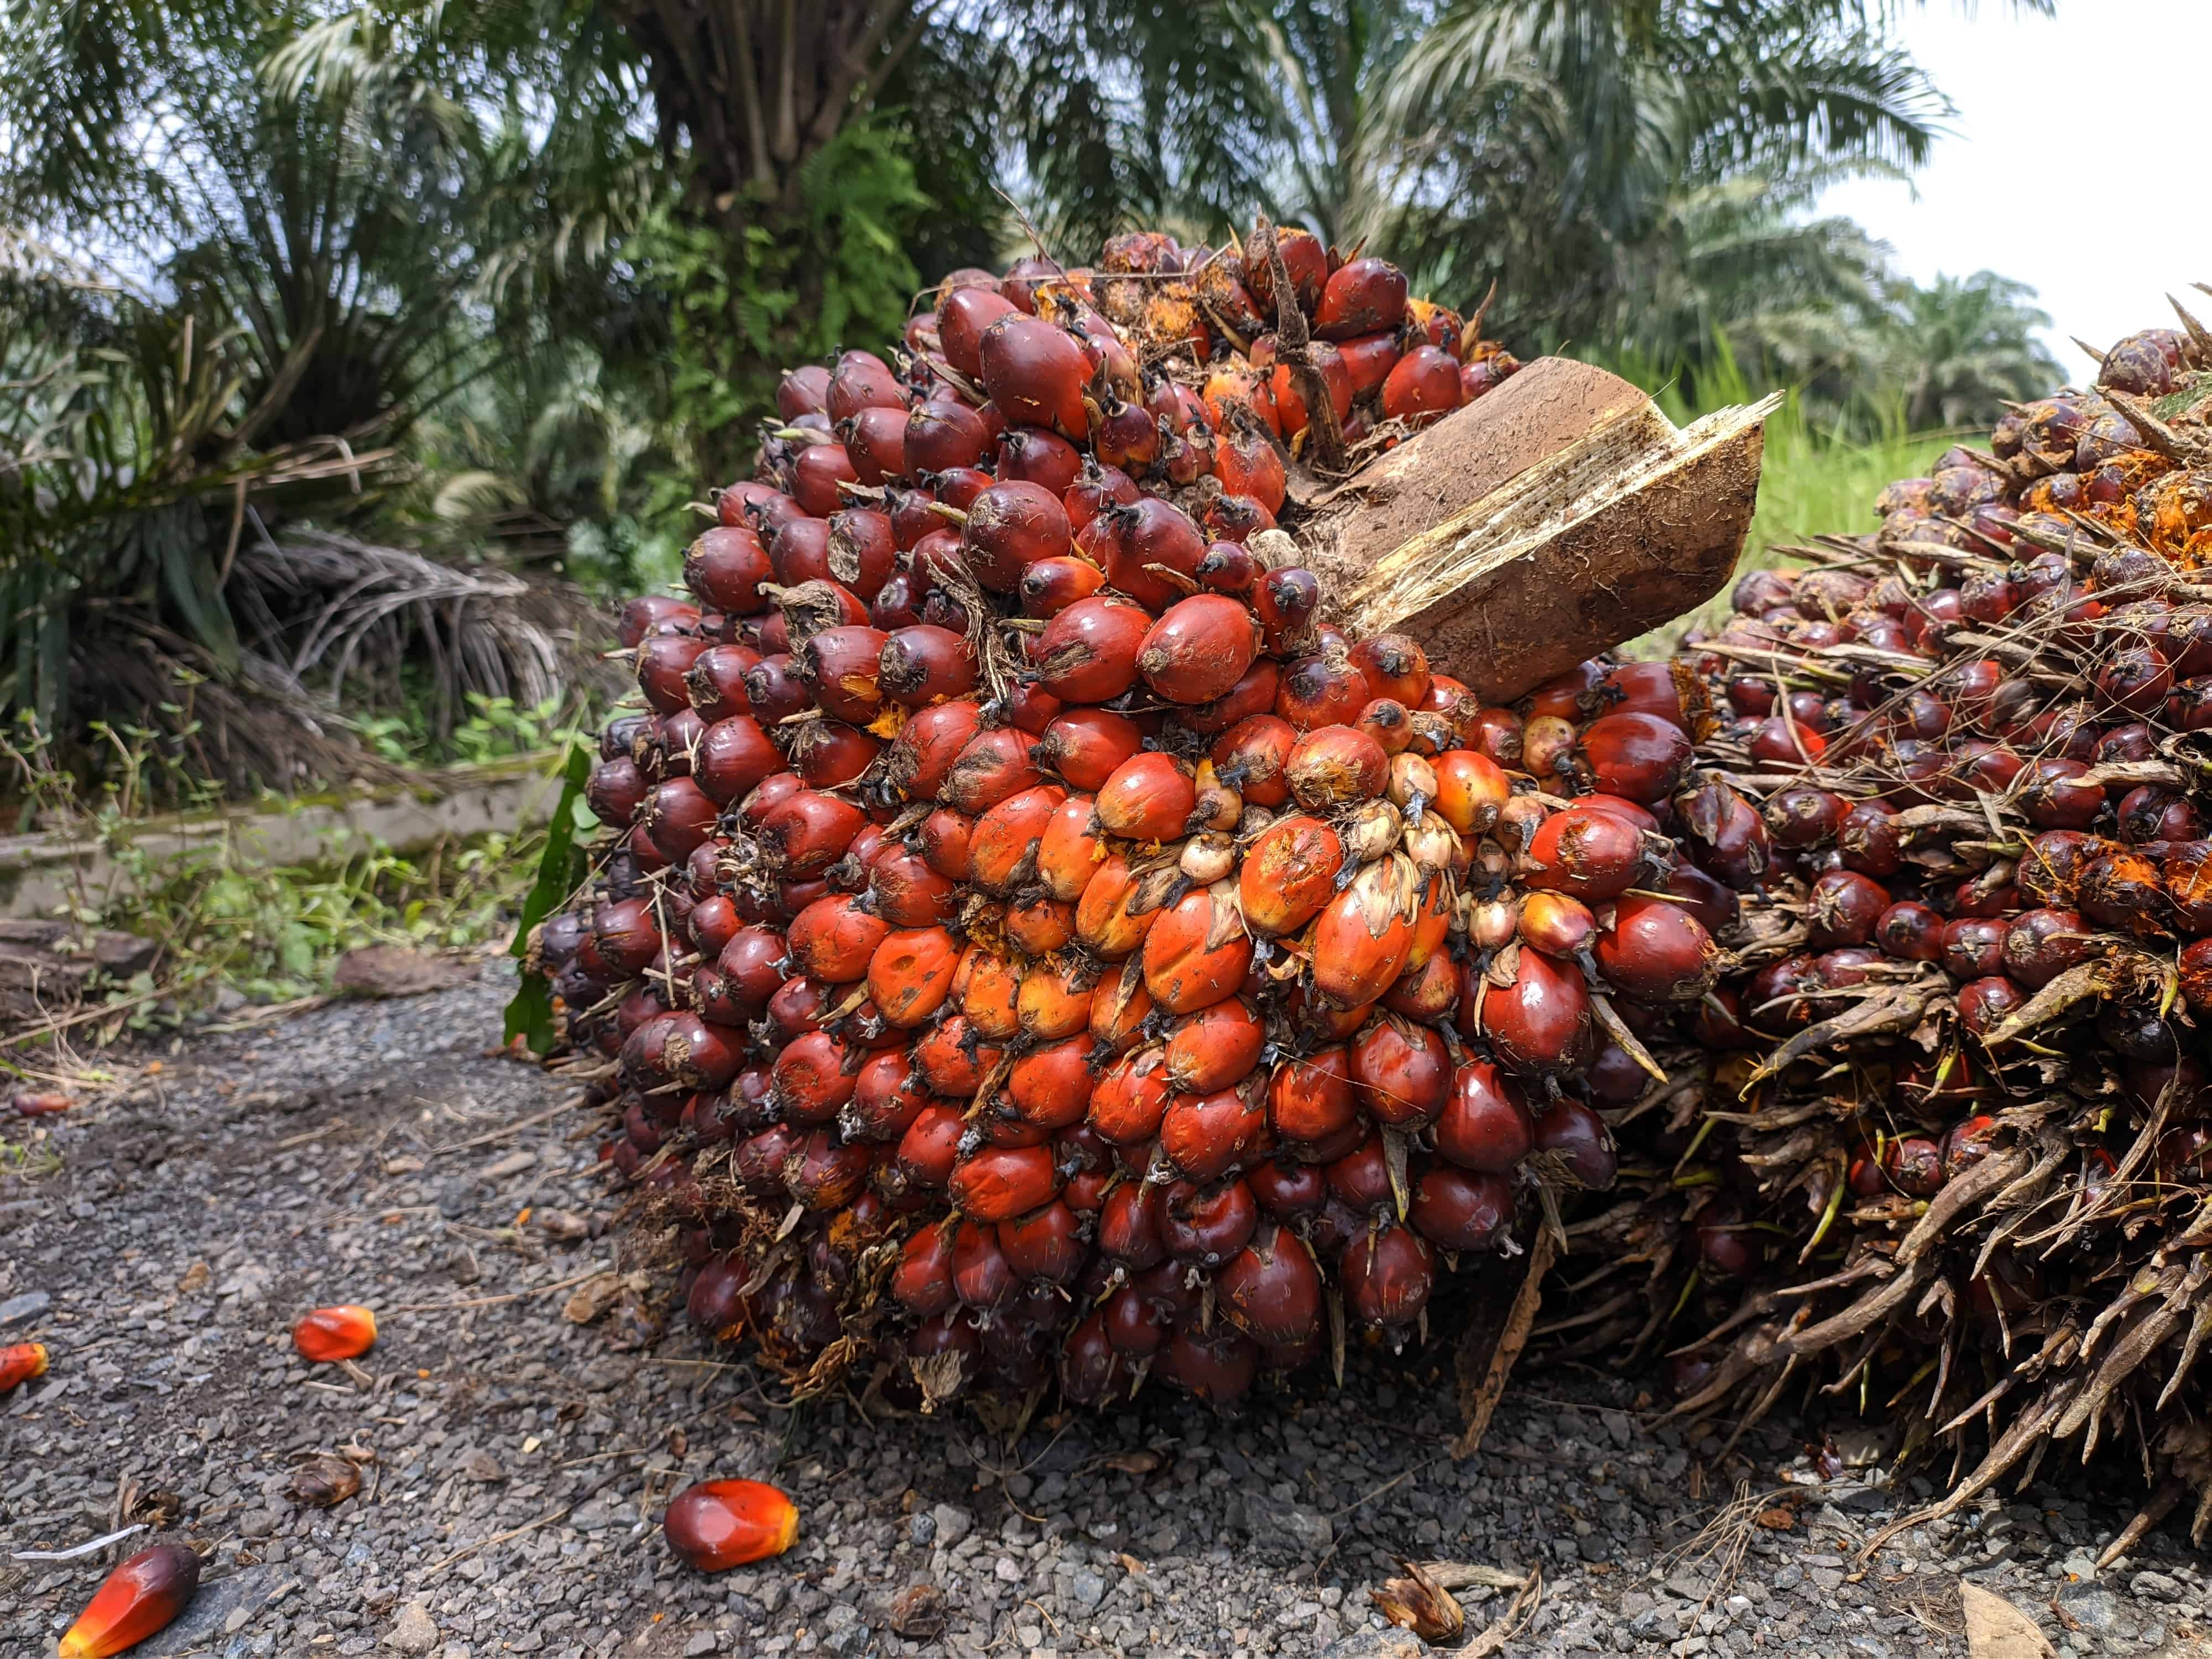 A bunch of Elaeis guineensis or oil palm fruit being harvested on the Kalimantan plantation.